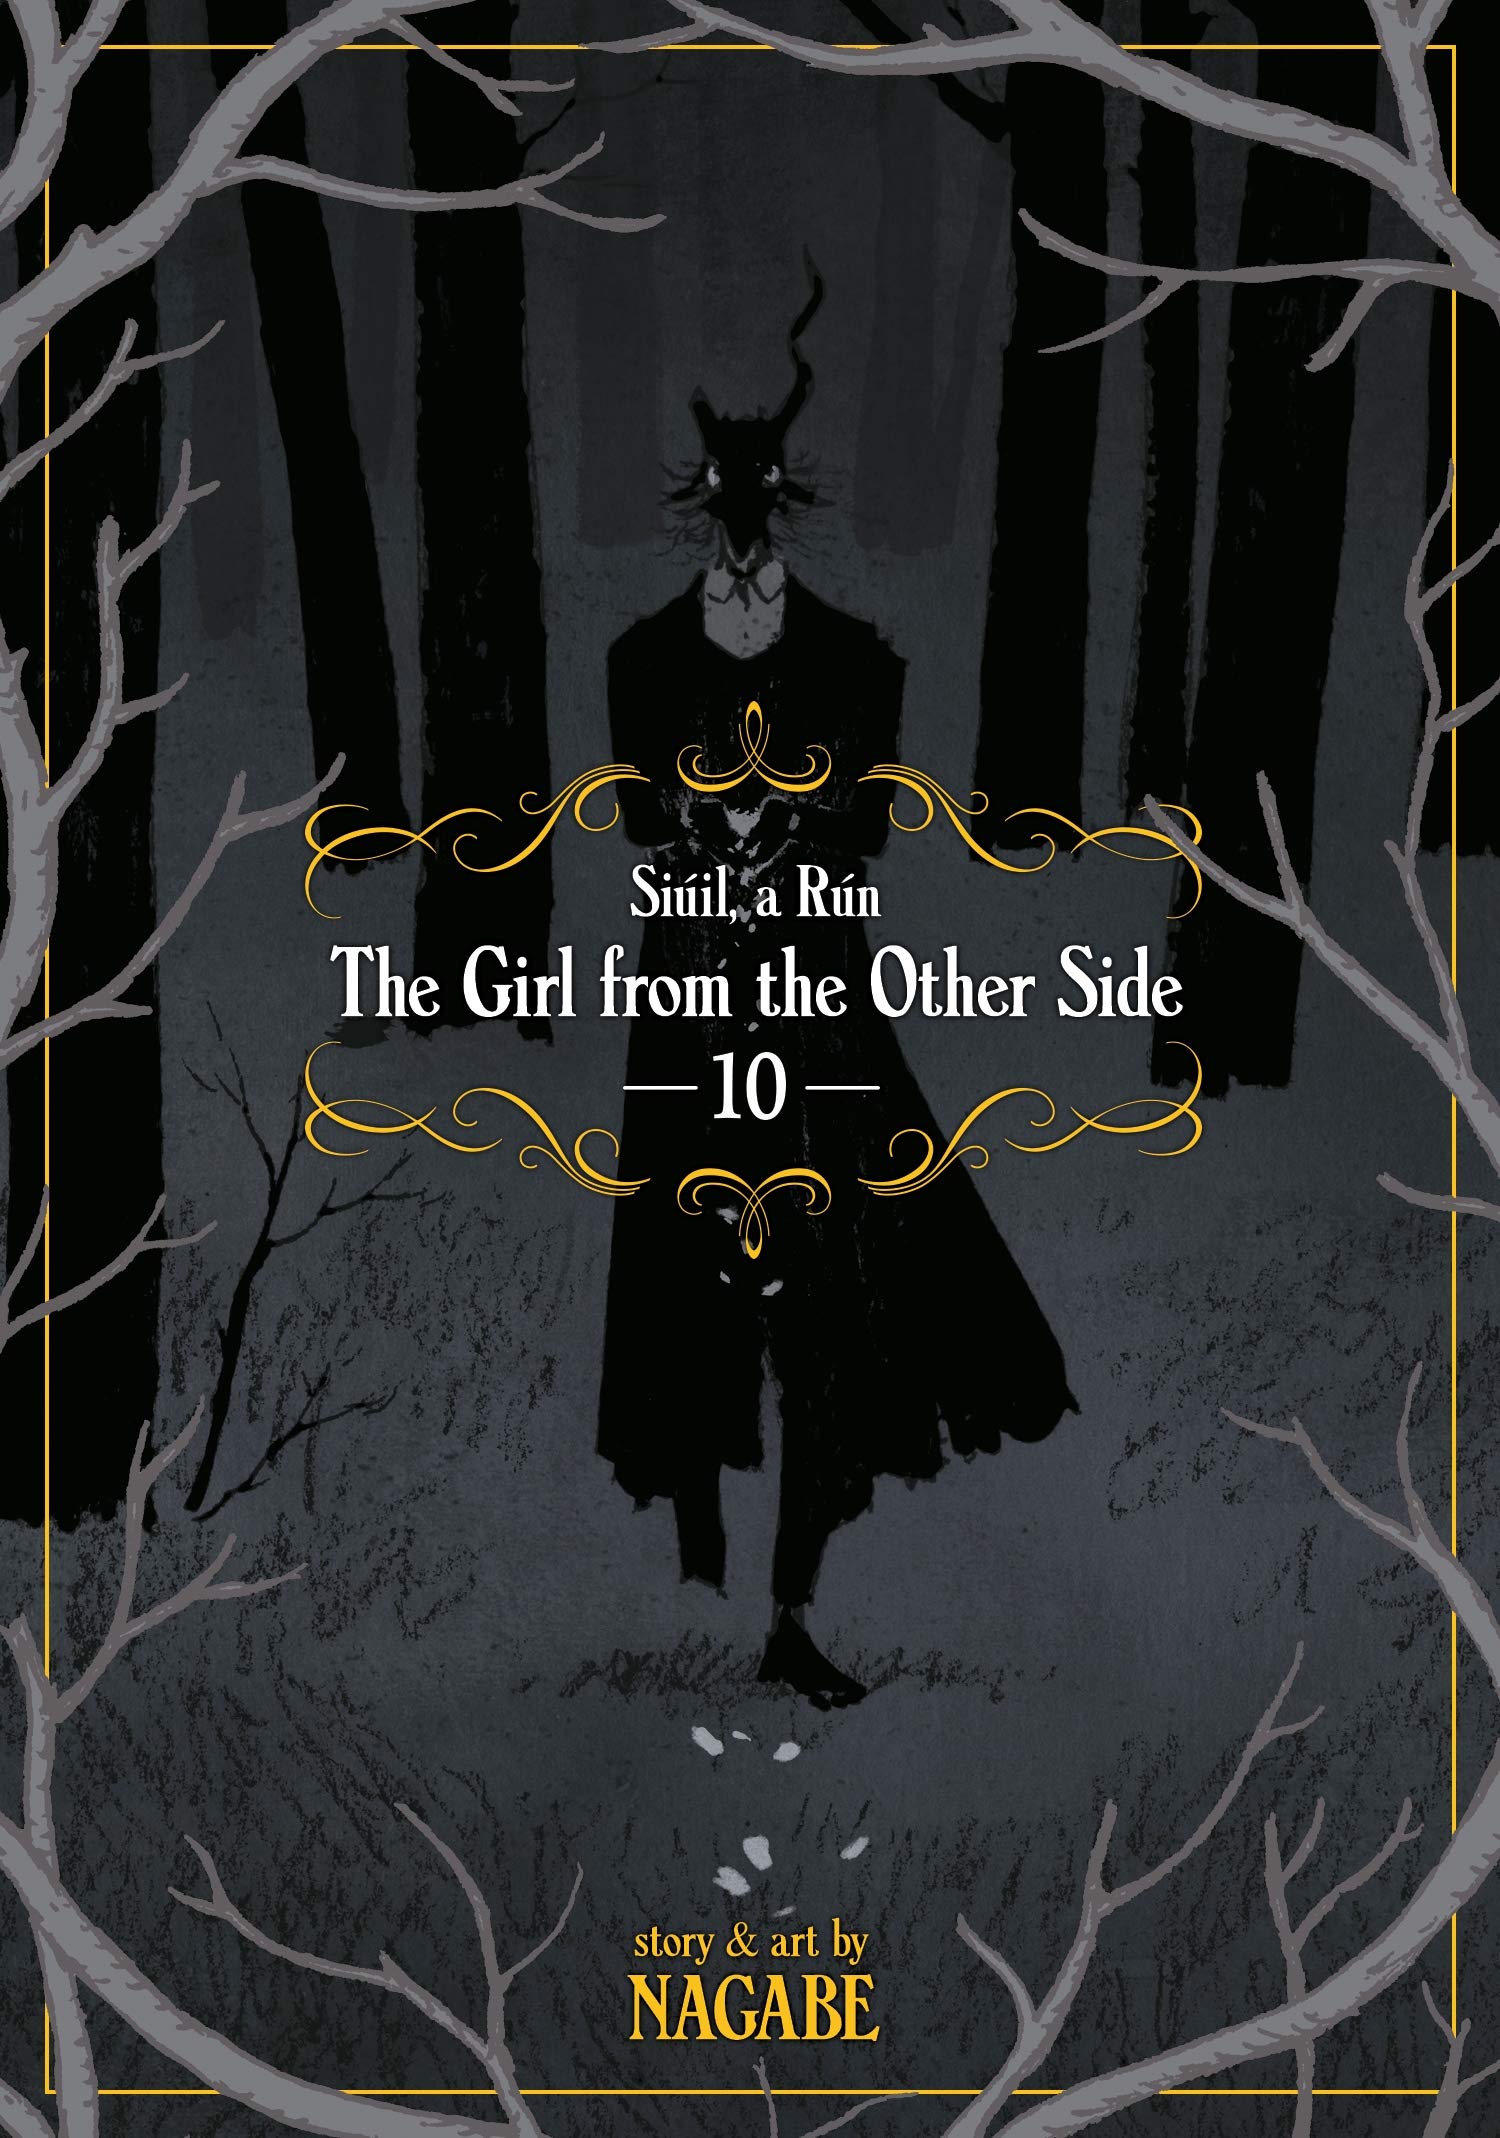 The Girl from the Other Side: Siuil, a Run Volume 10